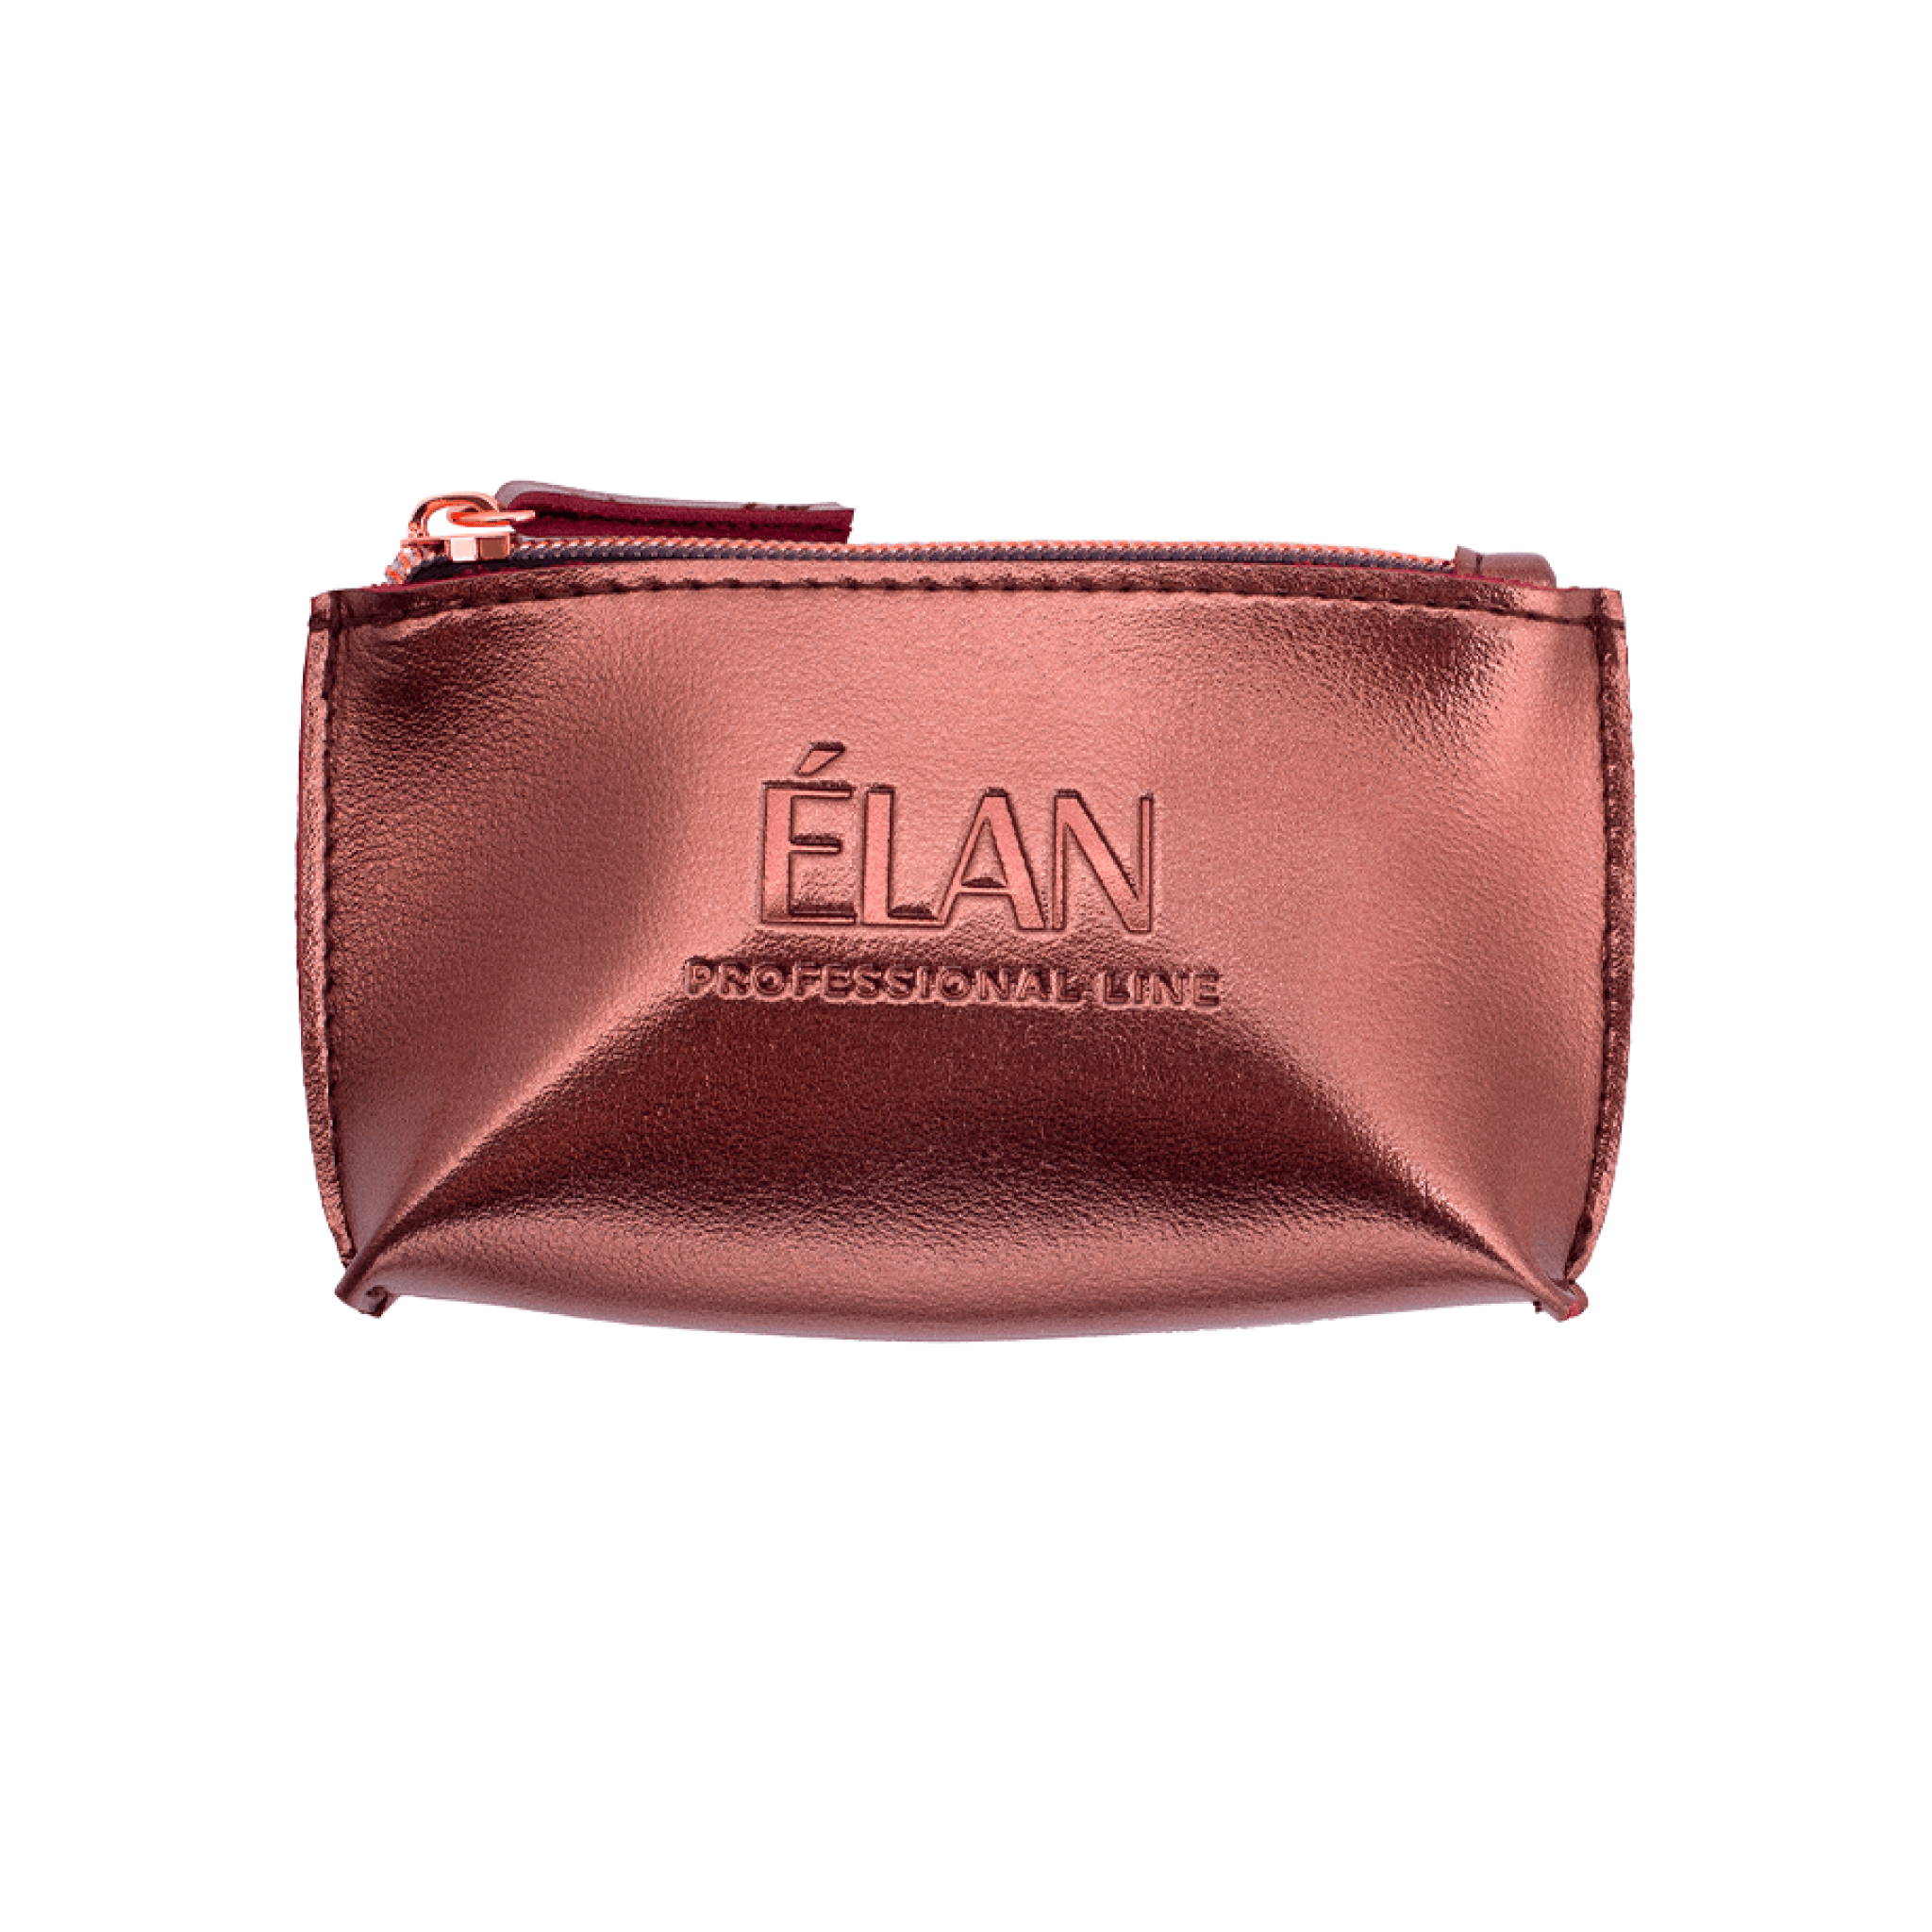 ELAN Branded Pouch - The Beauty House Shop